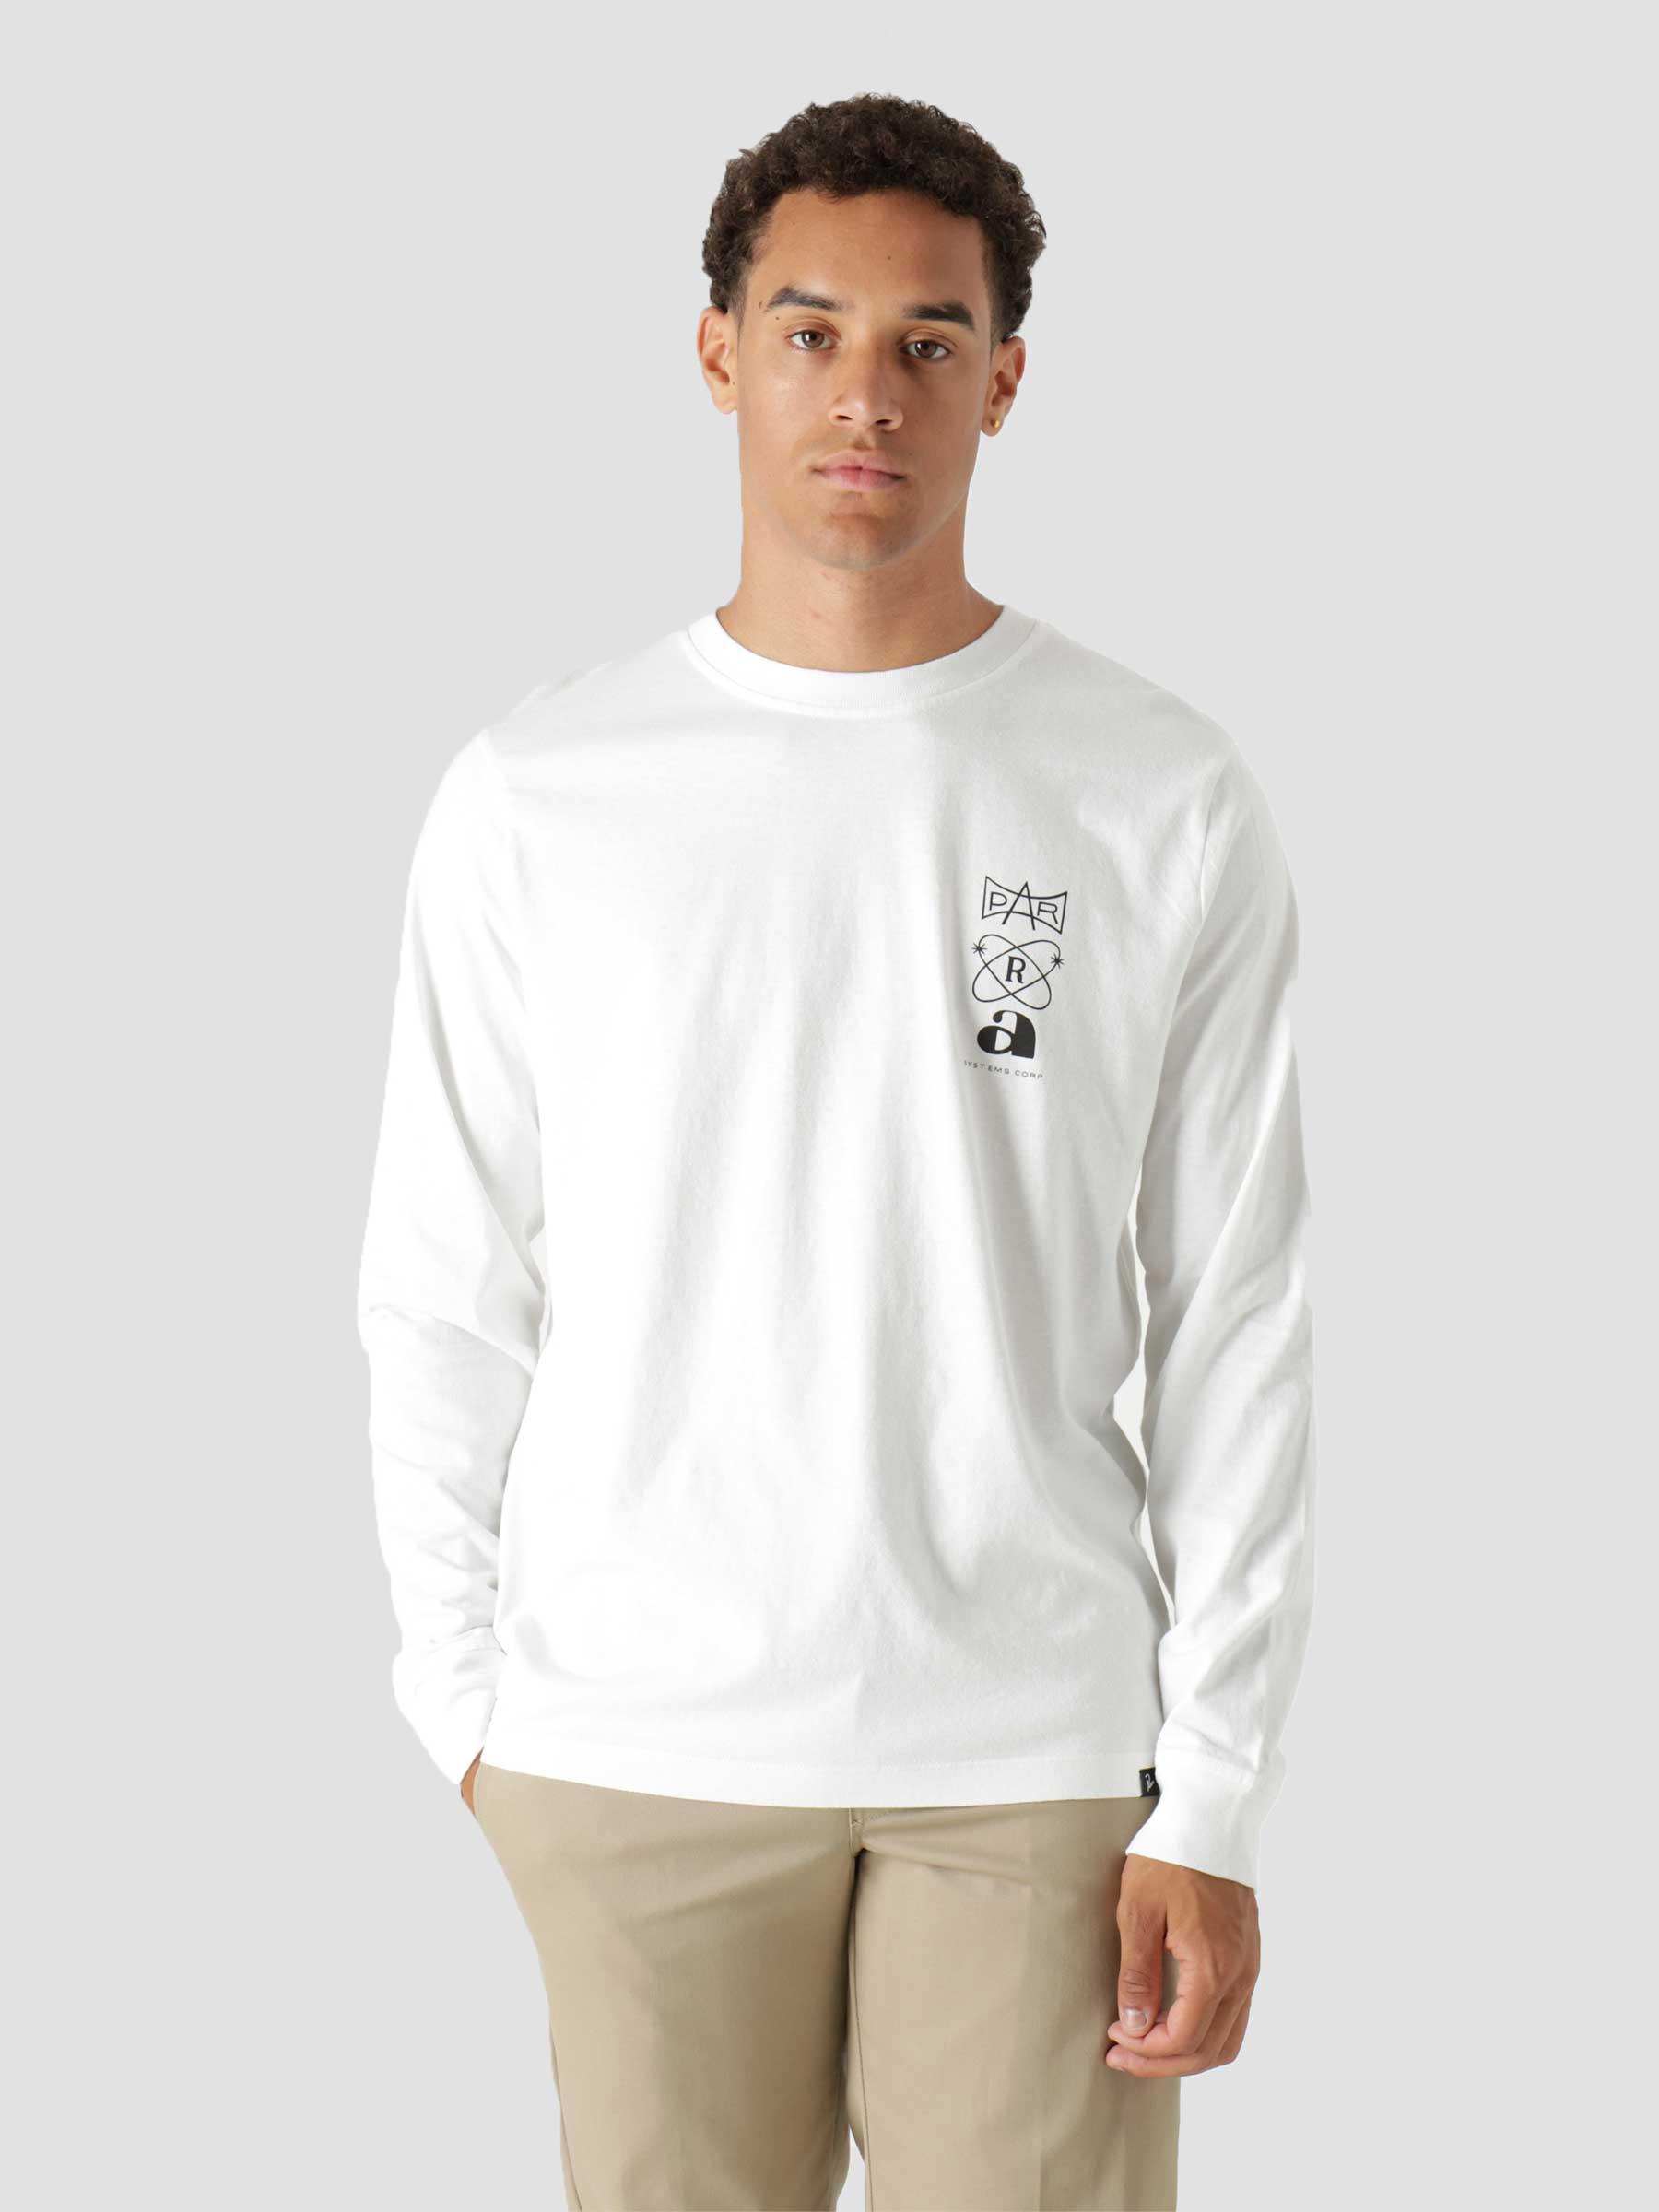 Rest Day Long Sleeve T-Shirt White 46210